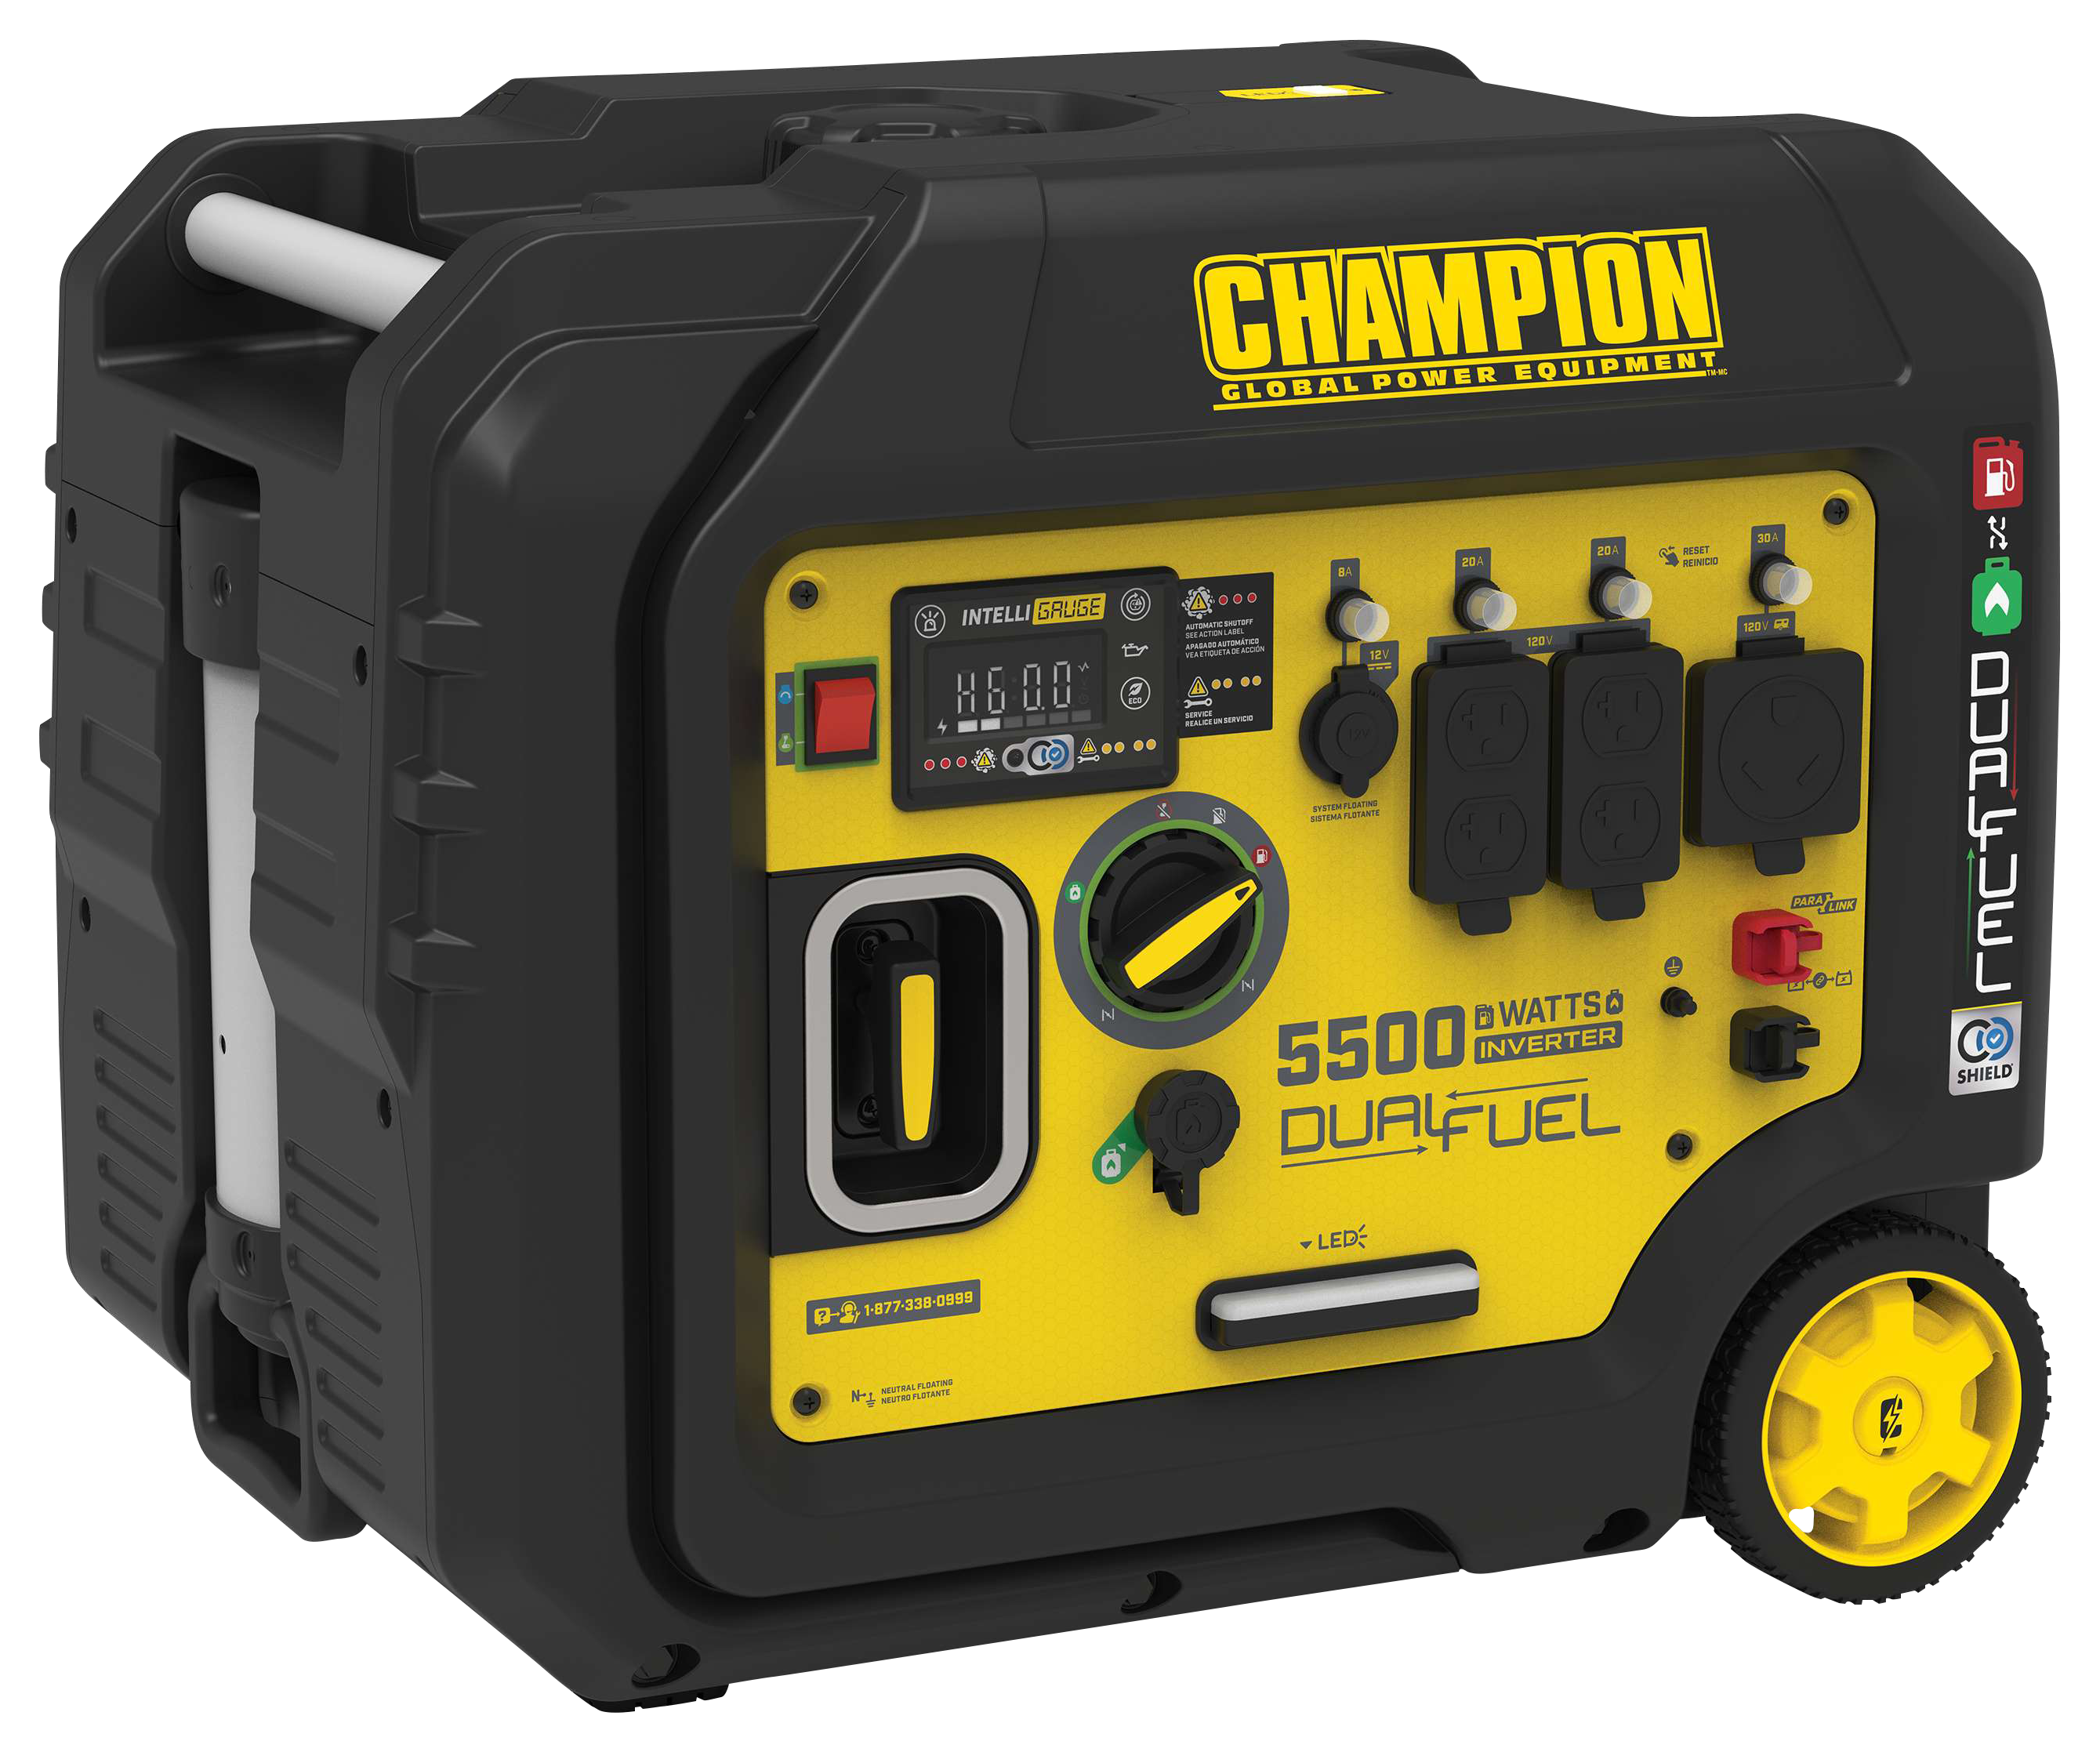 Champion Power Equipment 5500W Electric-Start Dual-Fuel Portable Generator Inverter with CO Shield